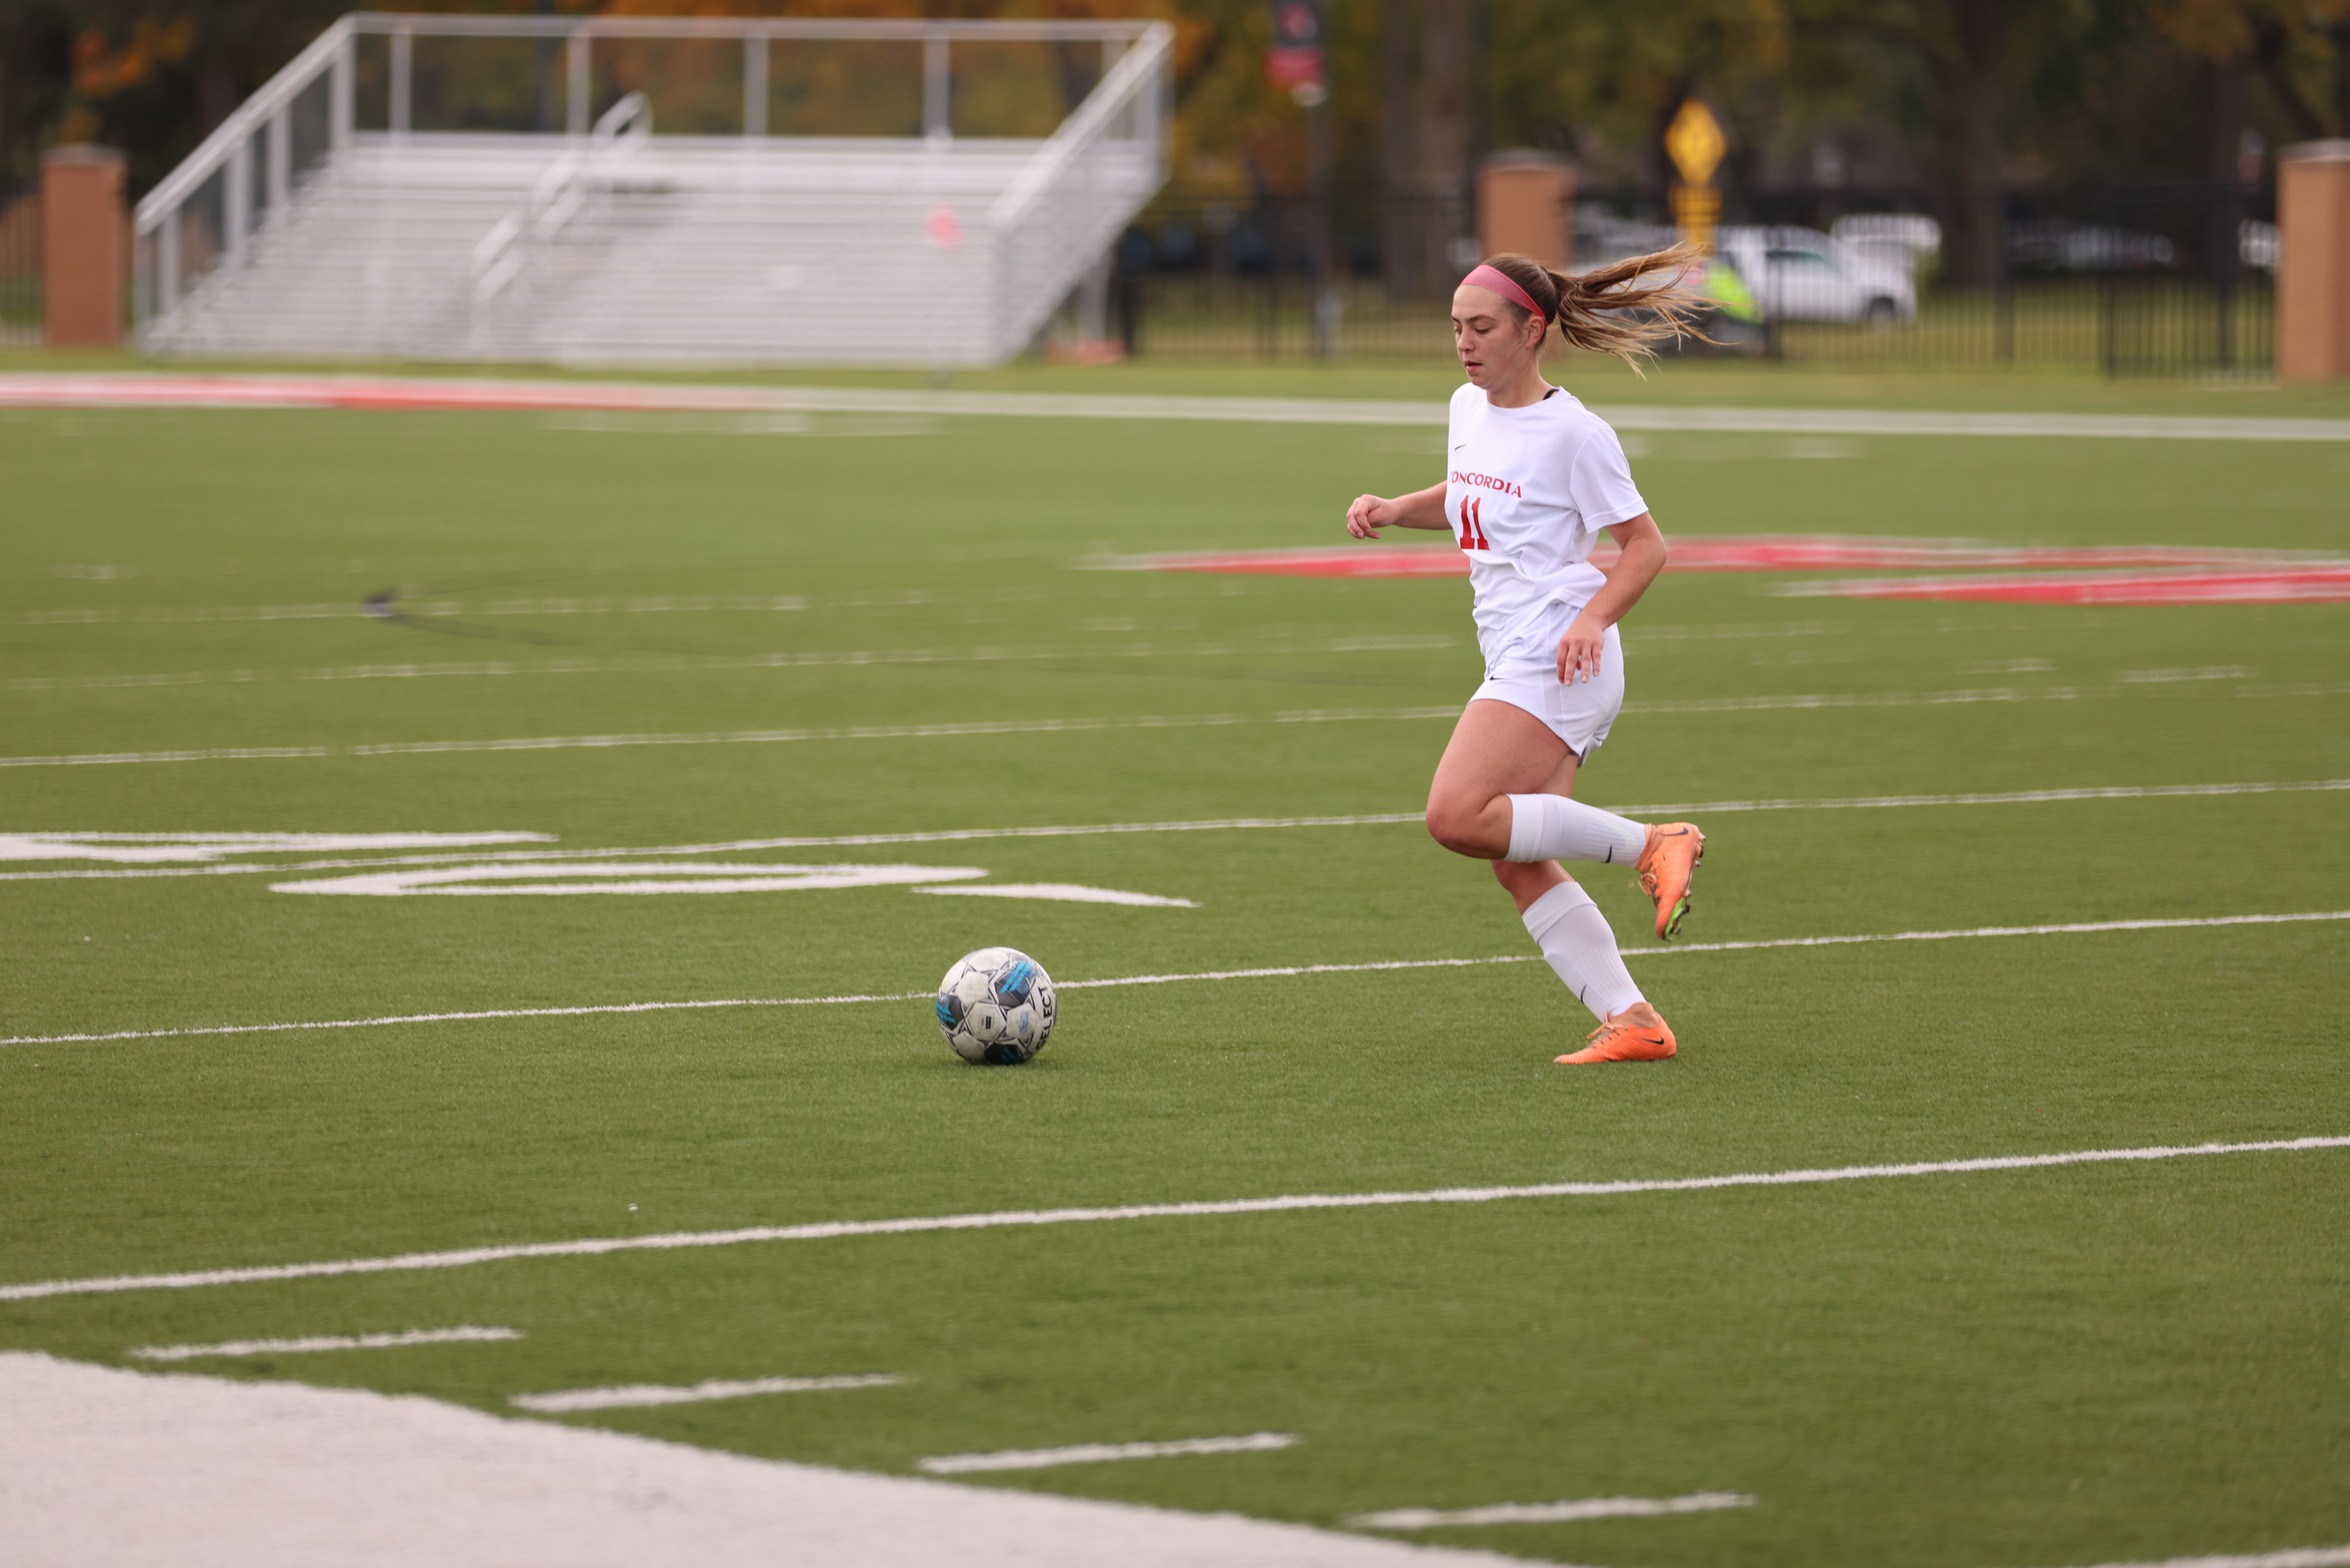 UNOH comes back to take down Women's Soccer 2-1